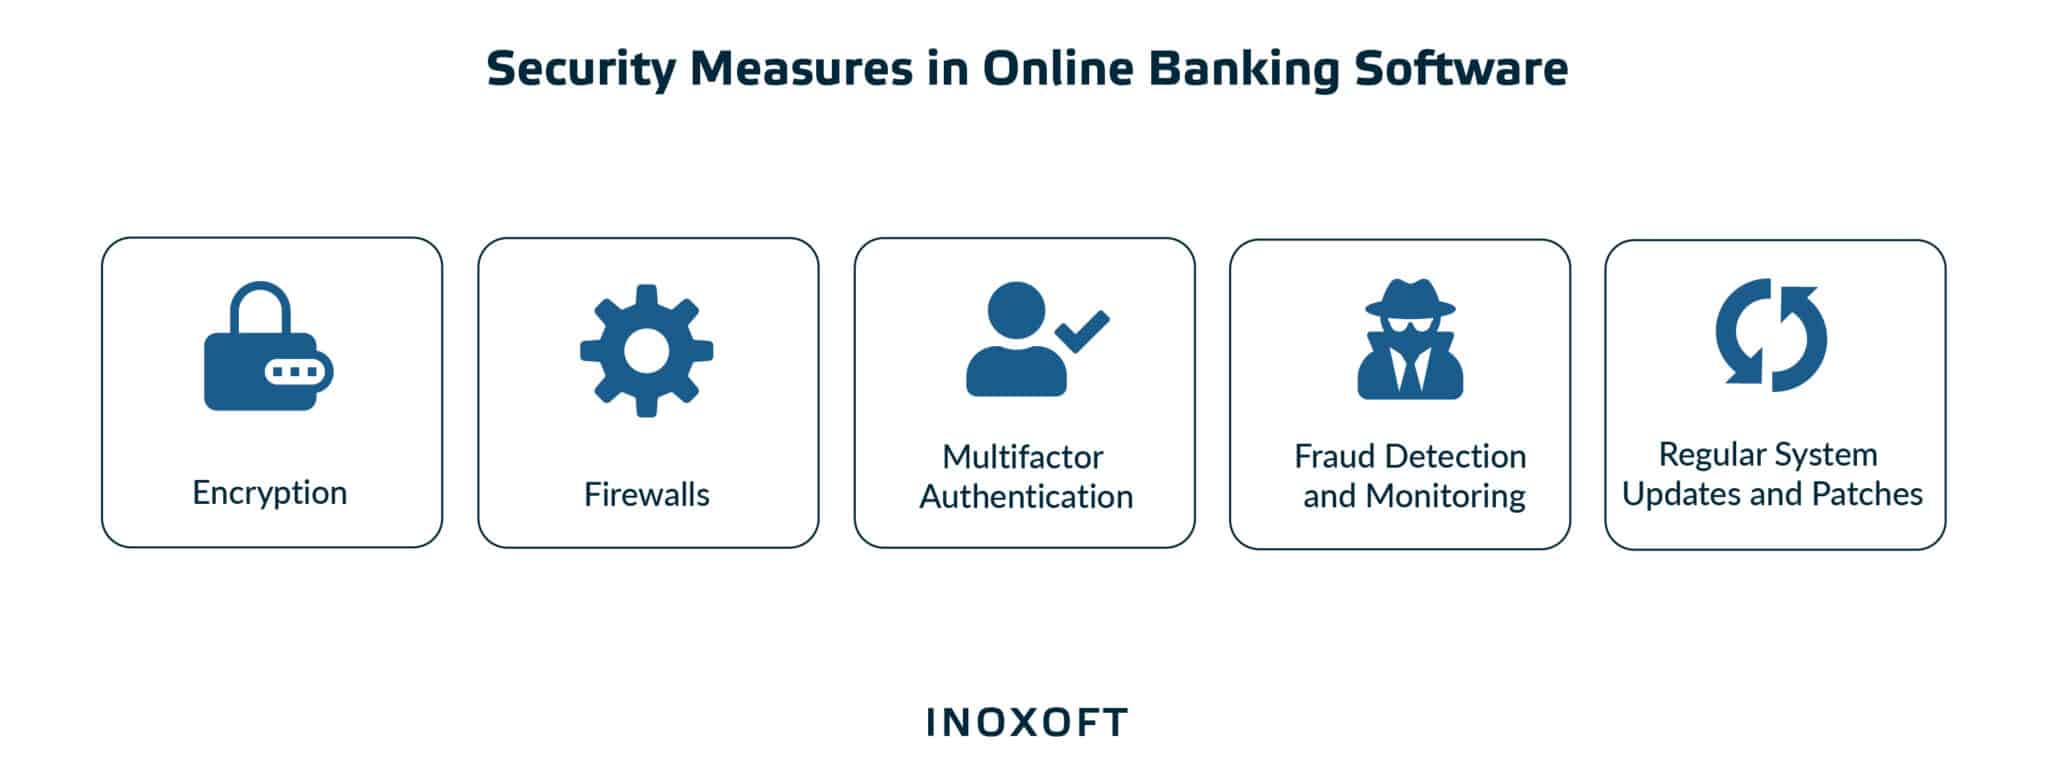 Security Measures in Online Banking Software